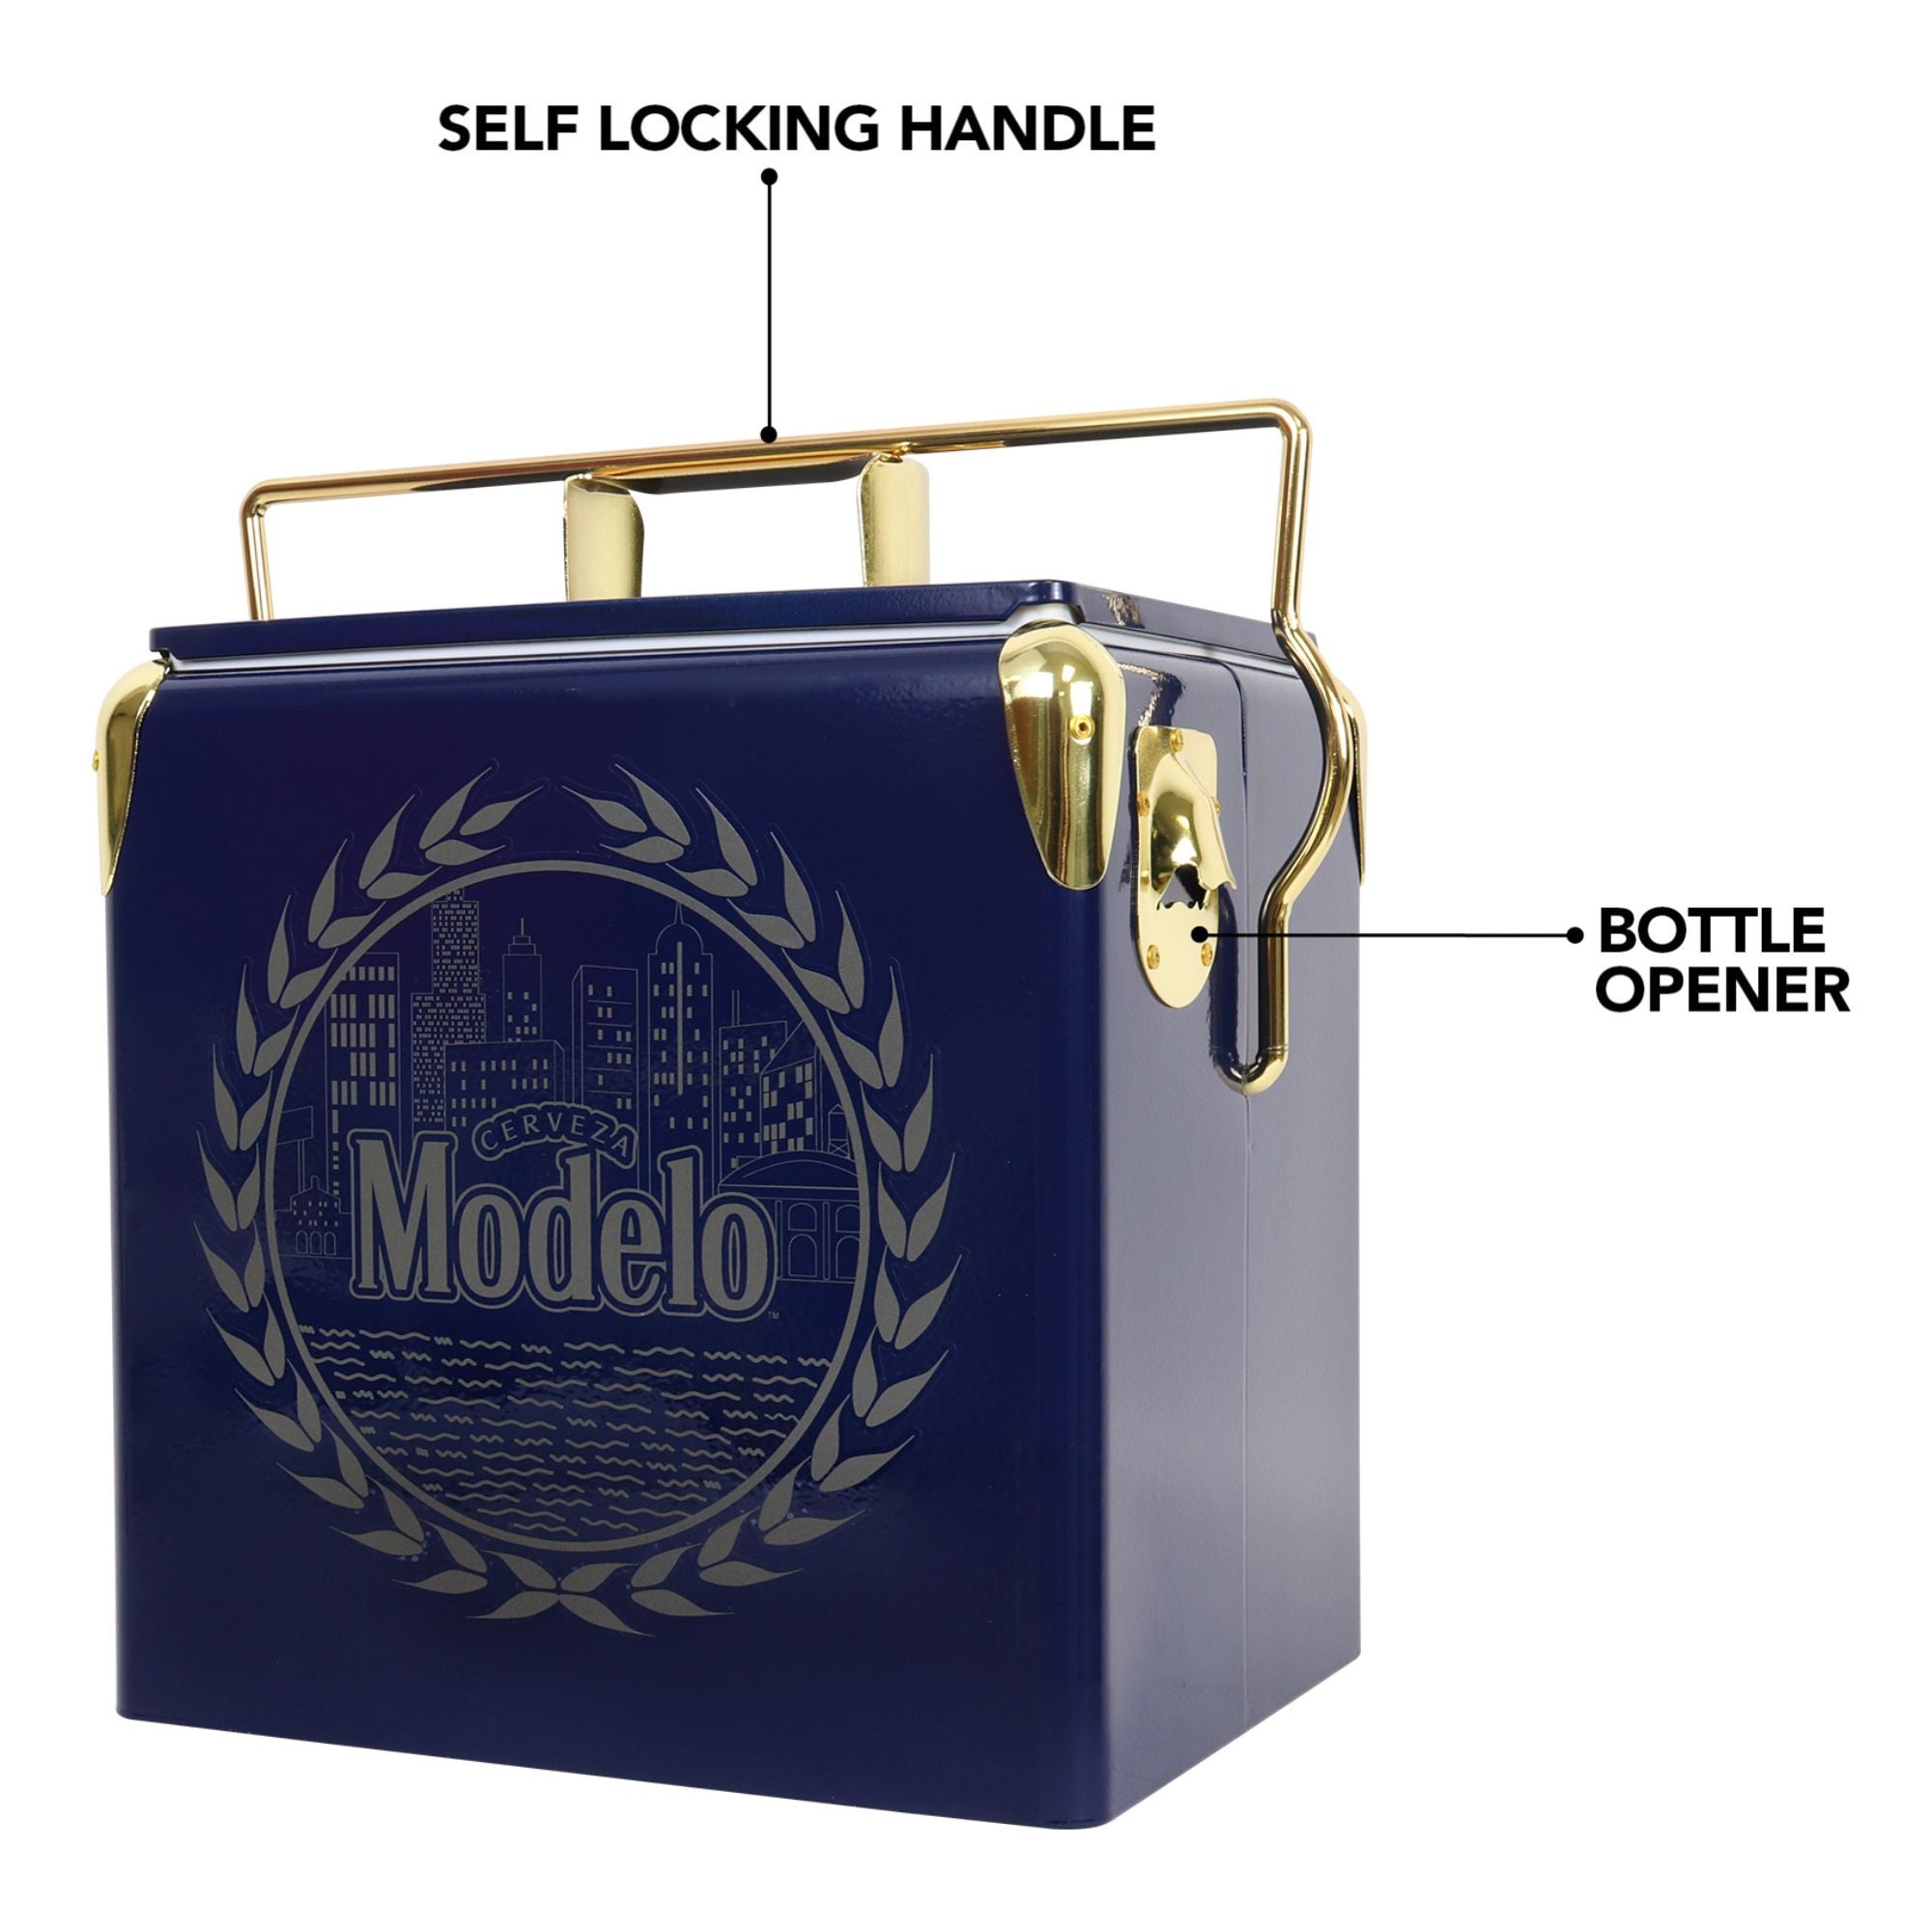 Product shot of Modelo 14 qt retro cooler with bottle opener, closed, on a white background, with parts labeled: Self-locking handle; bottle opener